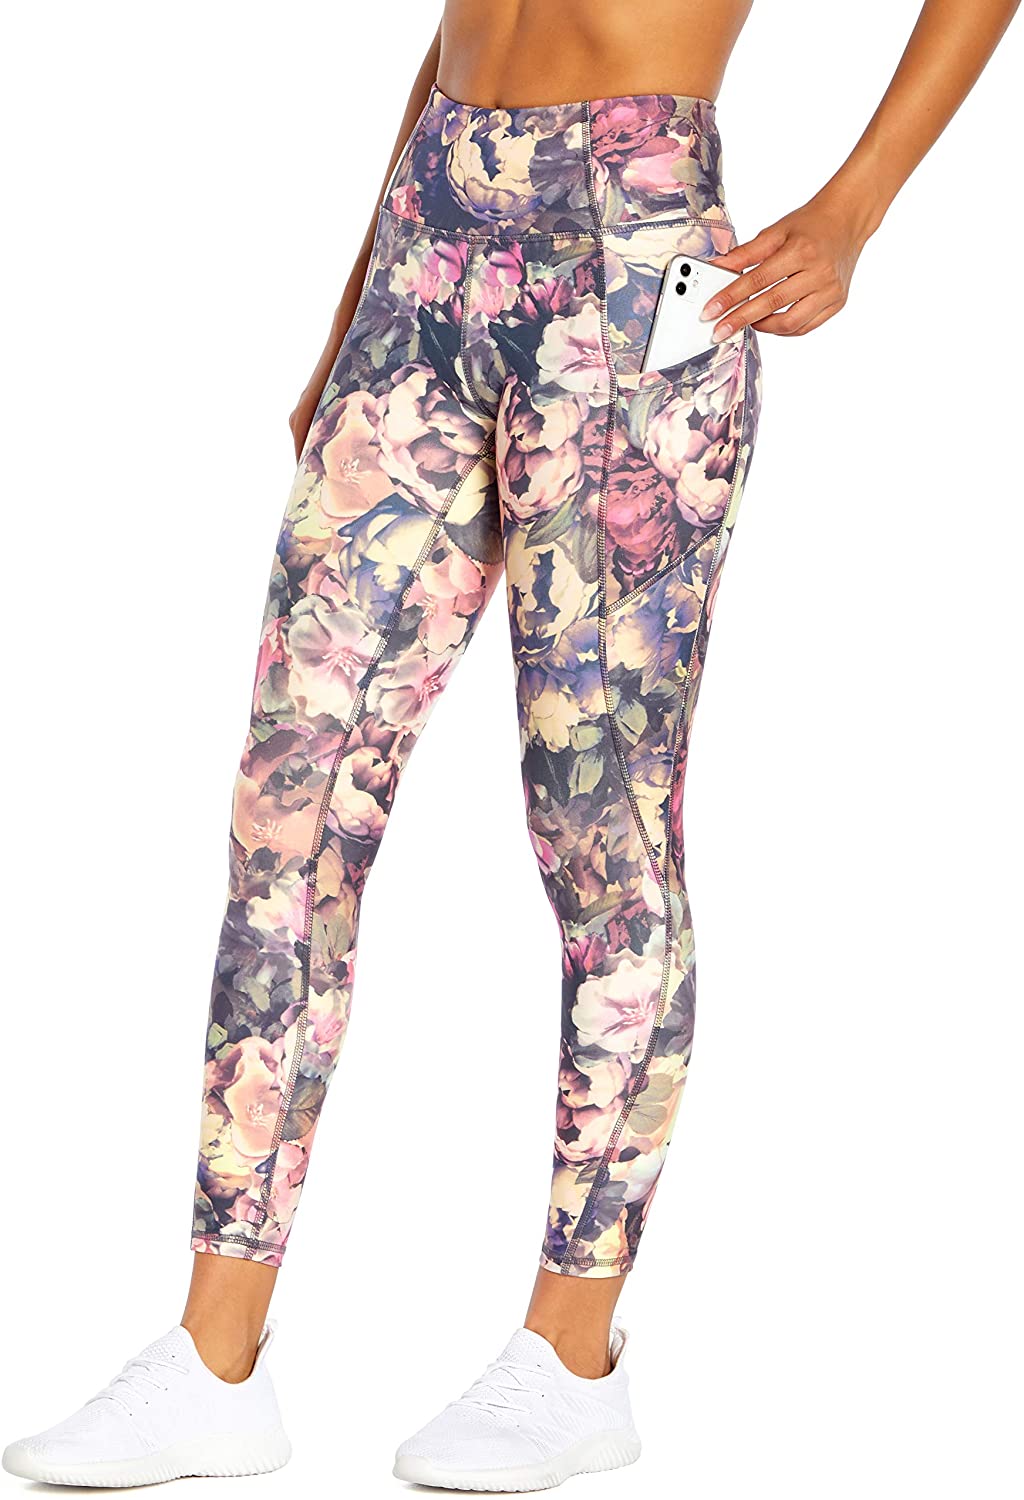 Jessica Simpson Snake Print Contender Lux 25” Ankle Leggings Multiple - $36  (47% Off Retail) New With Tags - From Celia